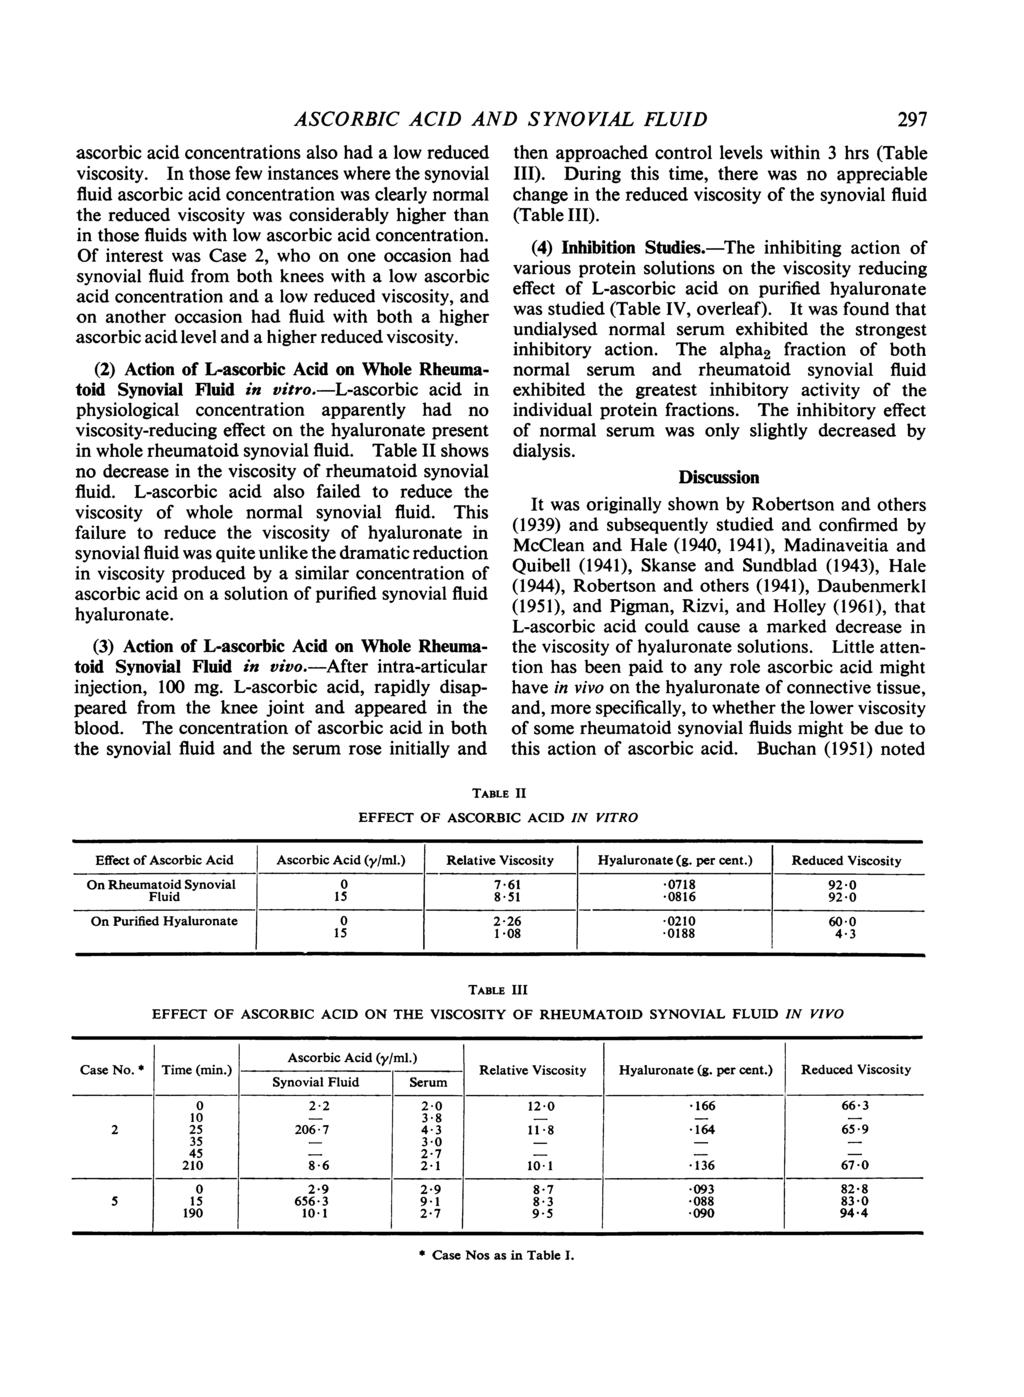 ascorbic acid concentrations also had a low reduced viscosity.